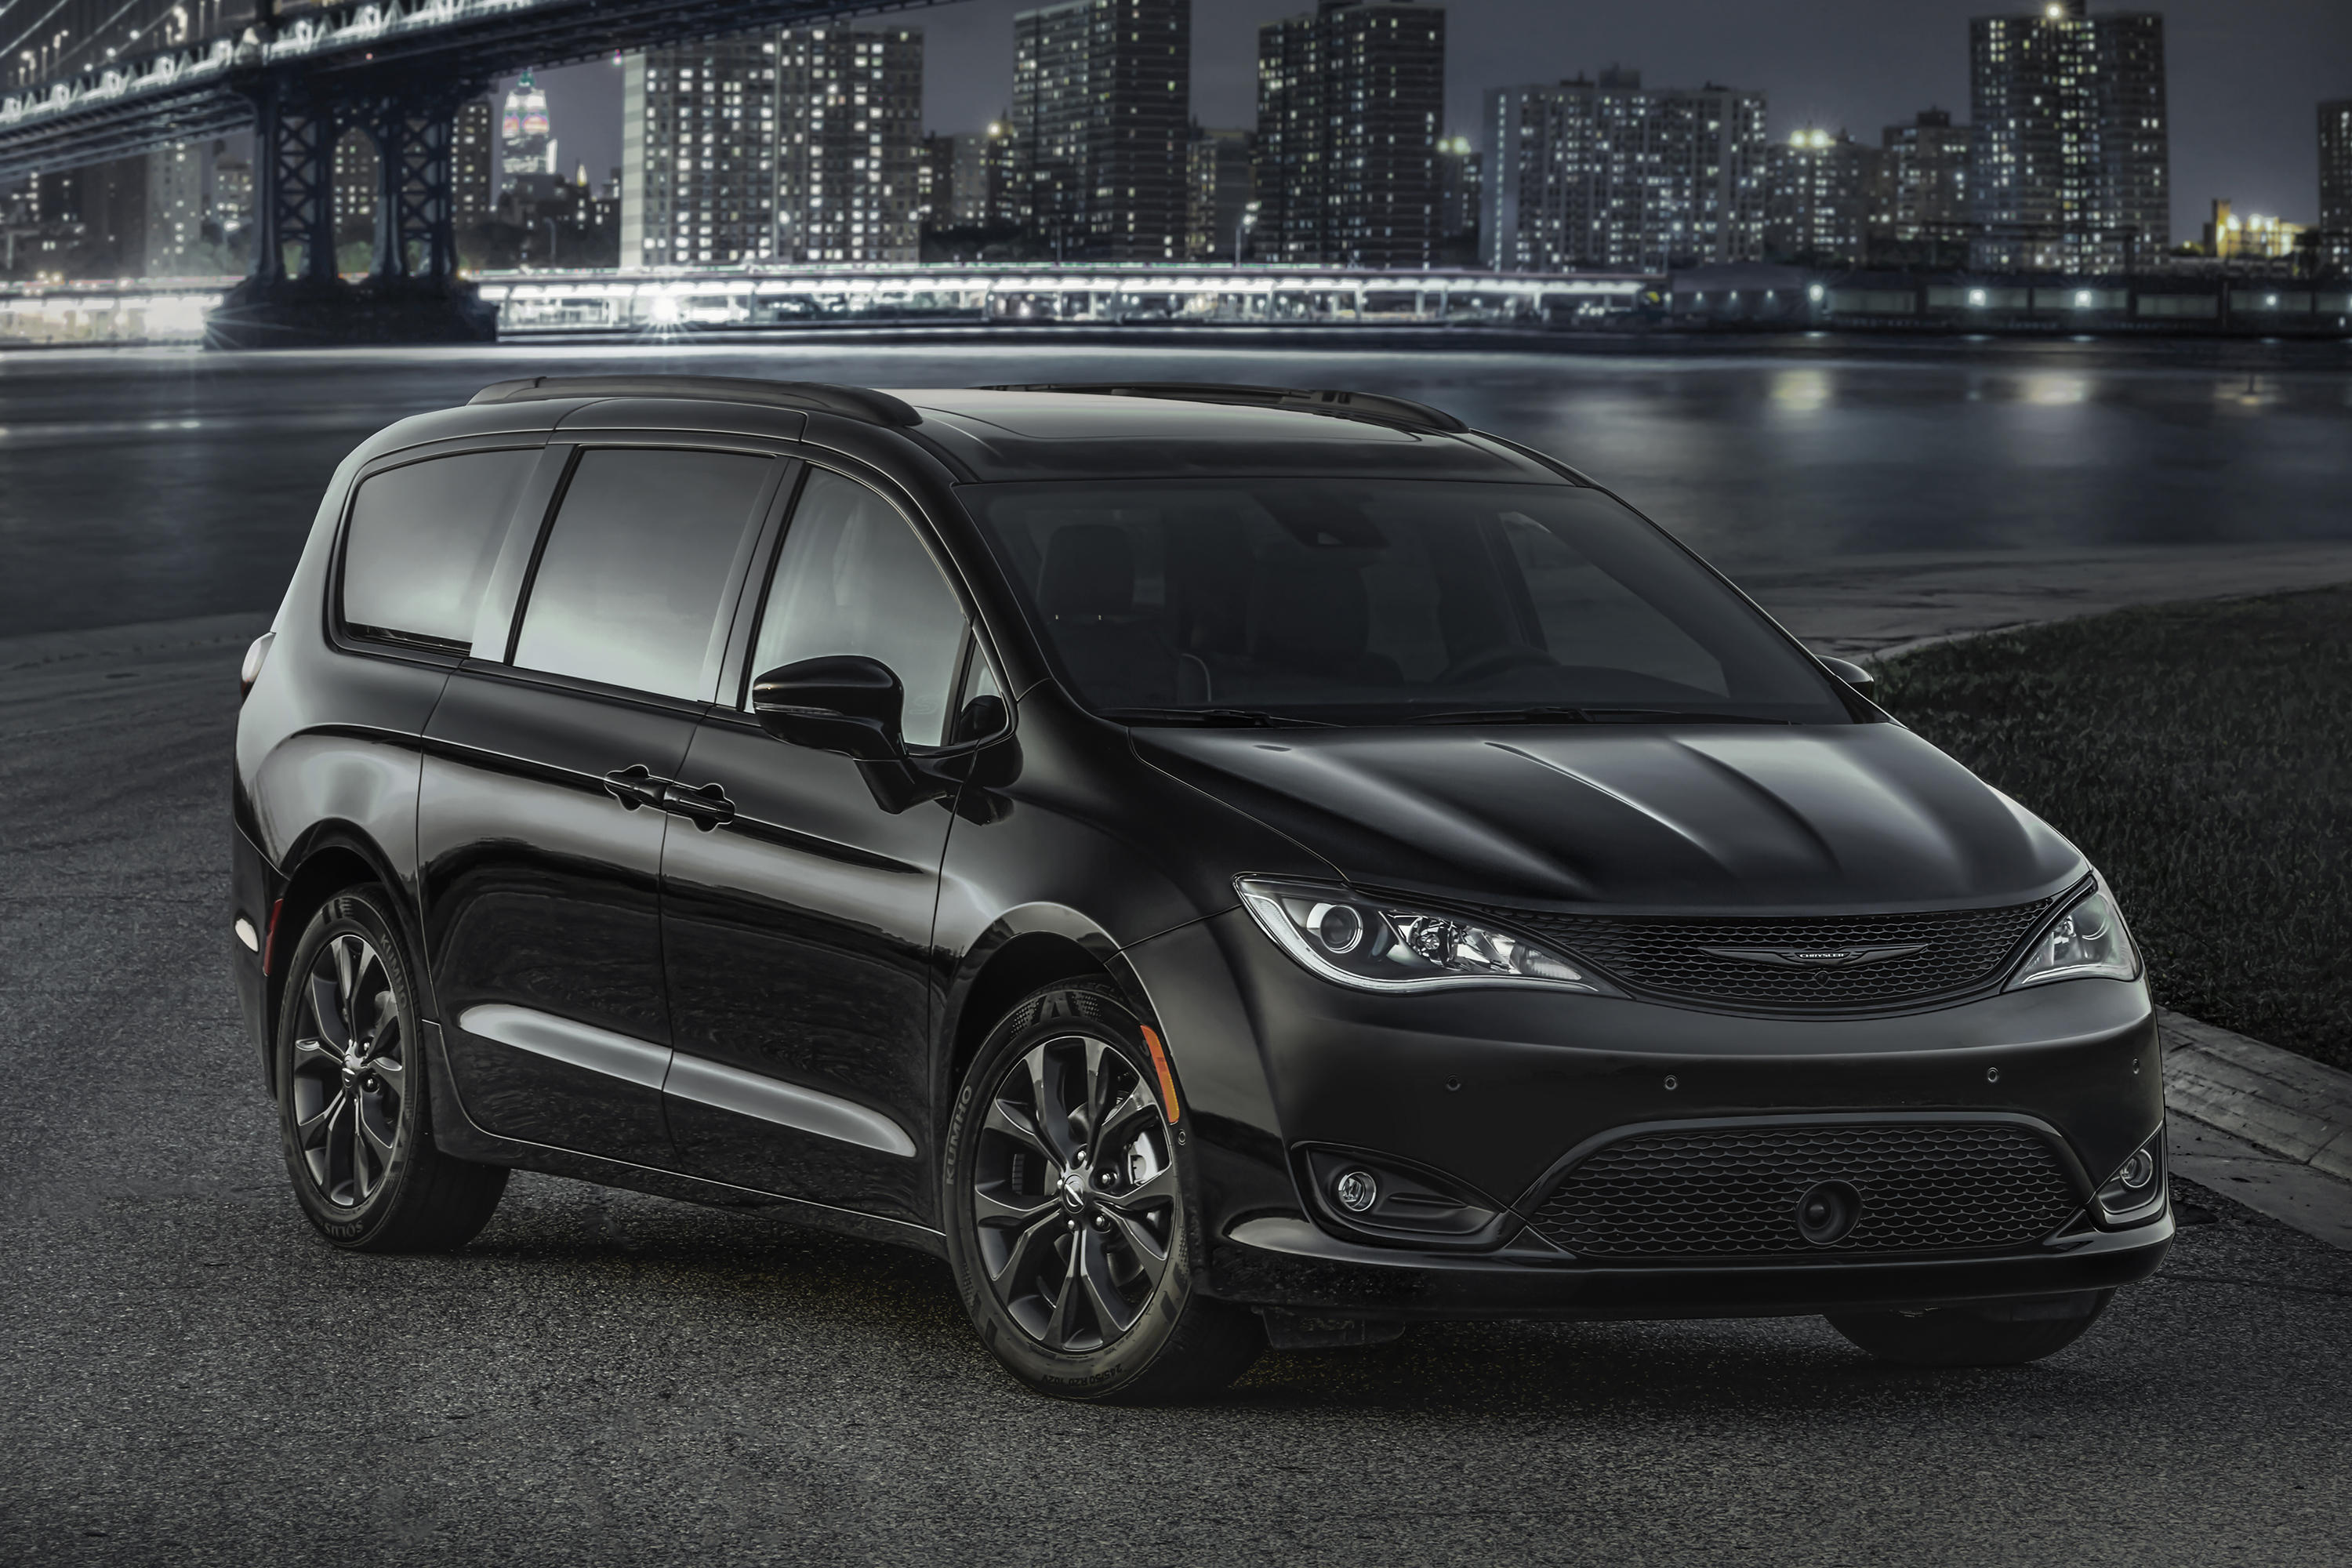 2018 Chrysler Pacifica S package 